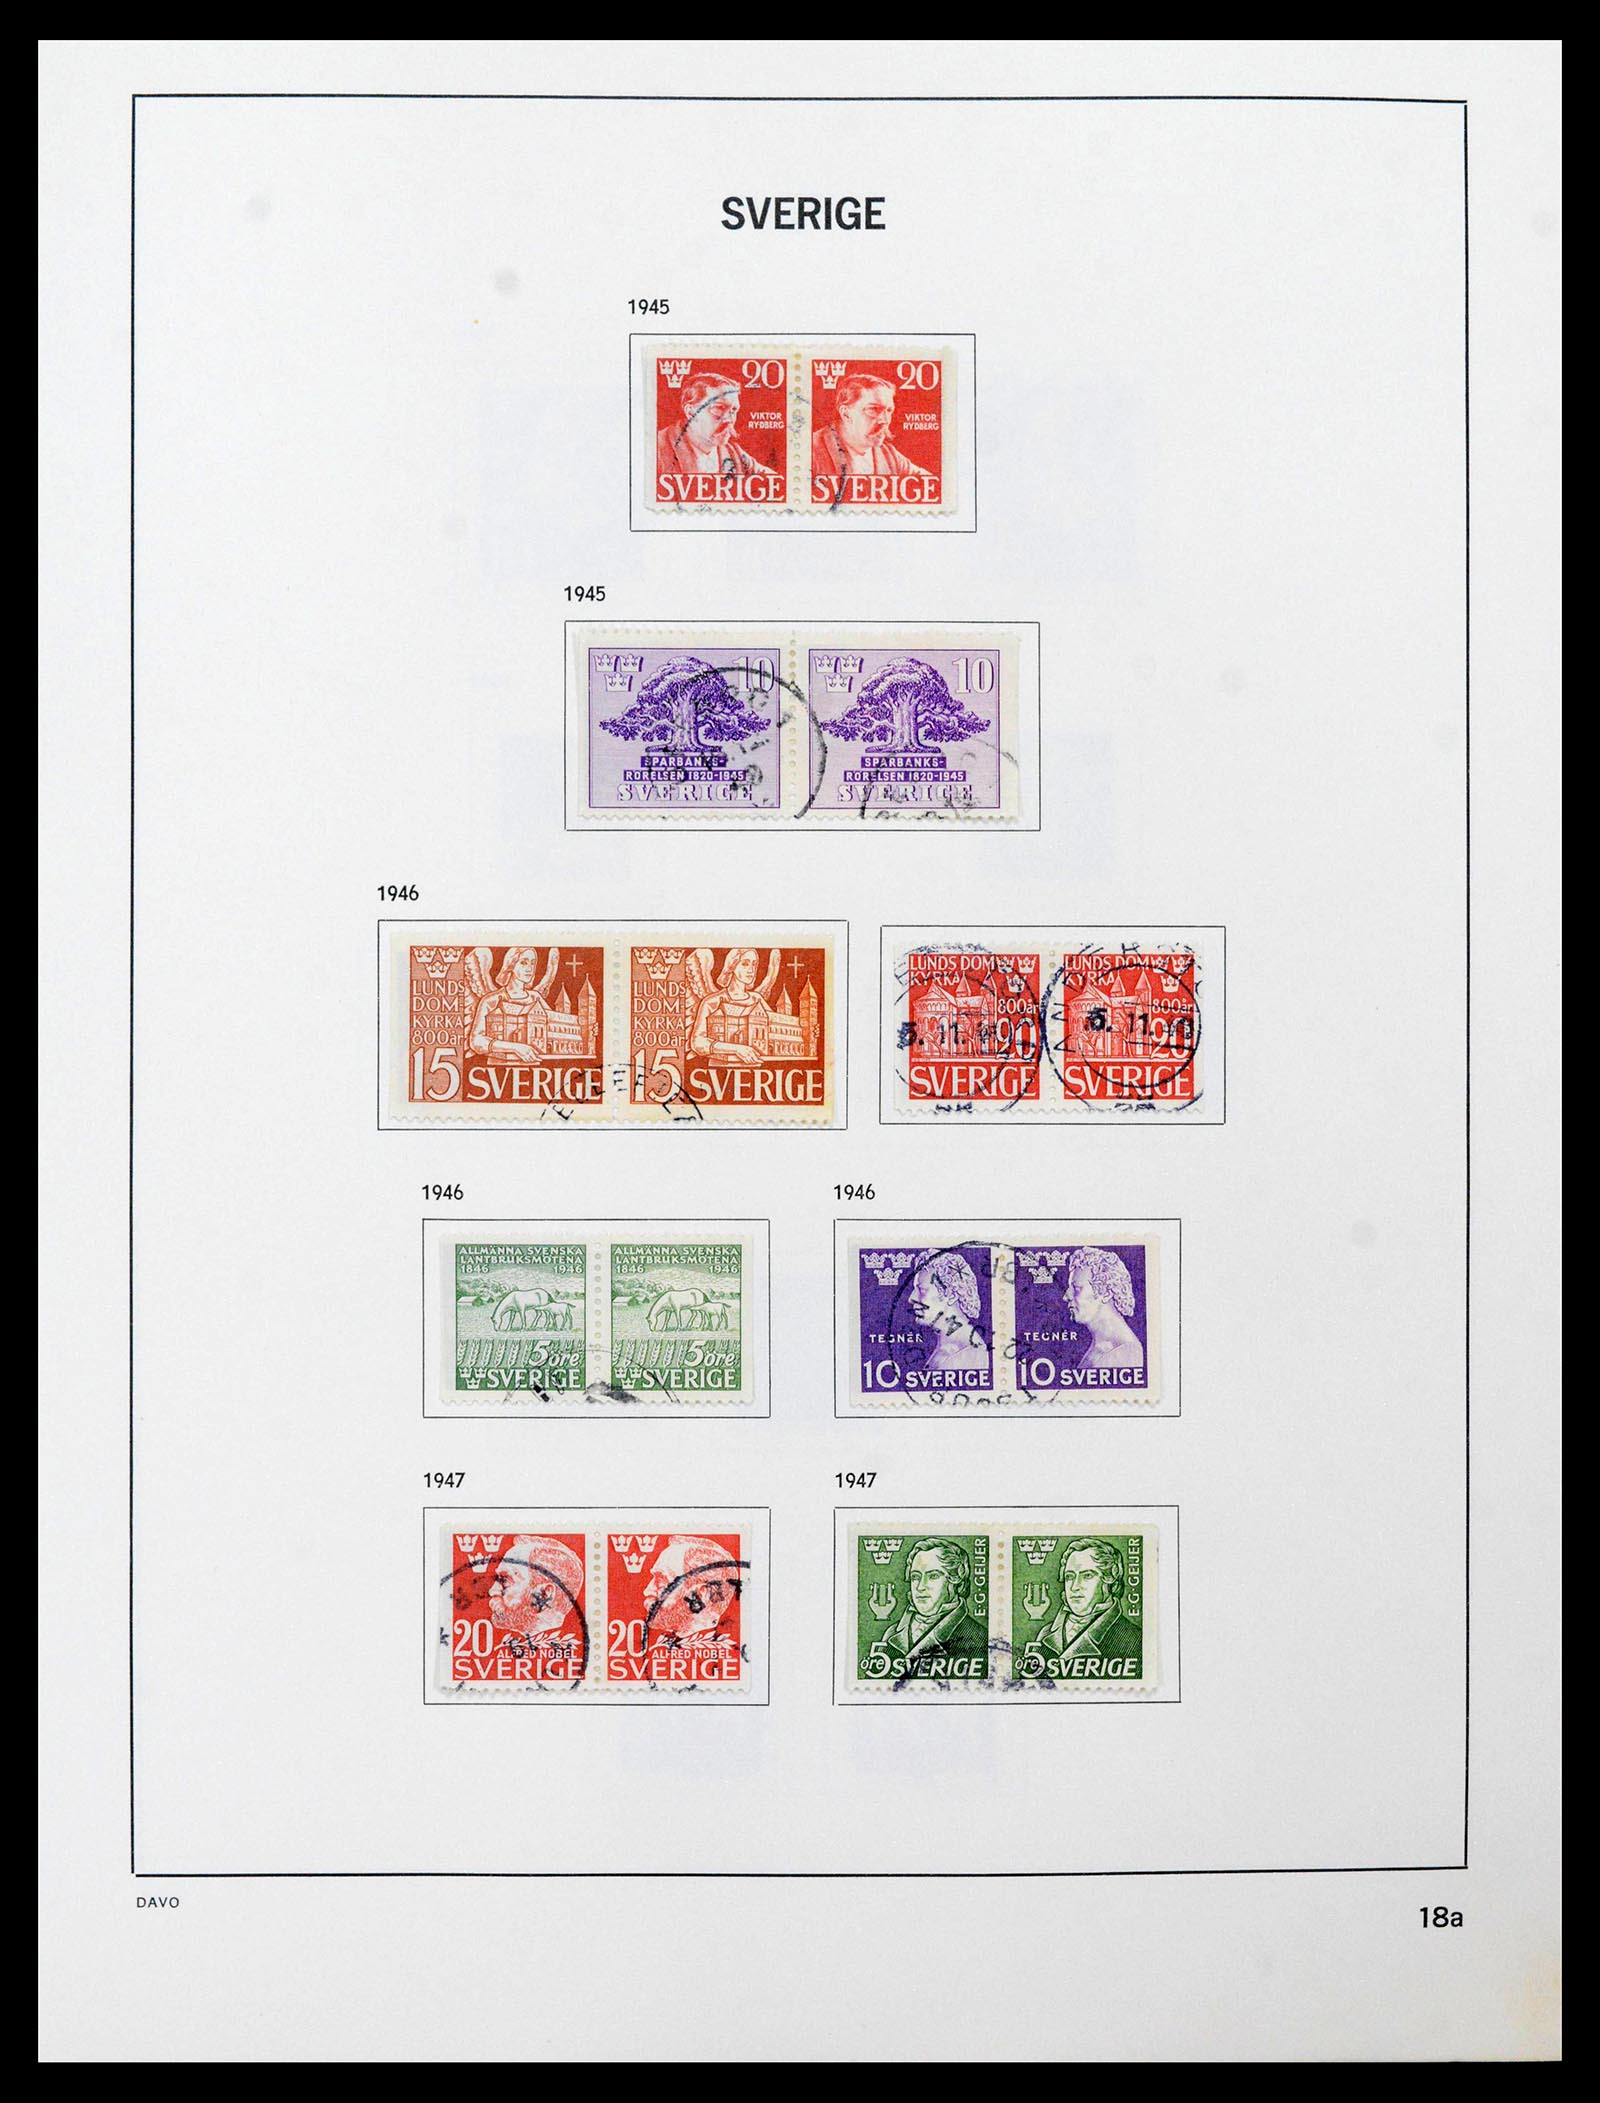 39331 0024 - Stamp collection 39331 Sweden 1855-2005.